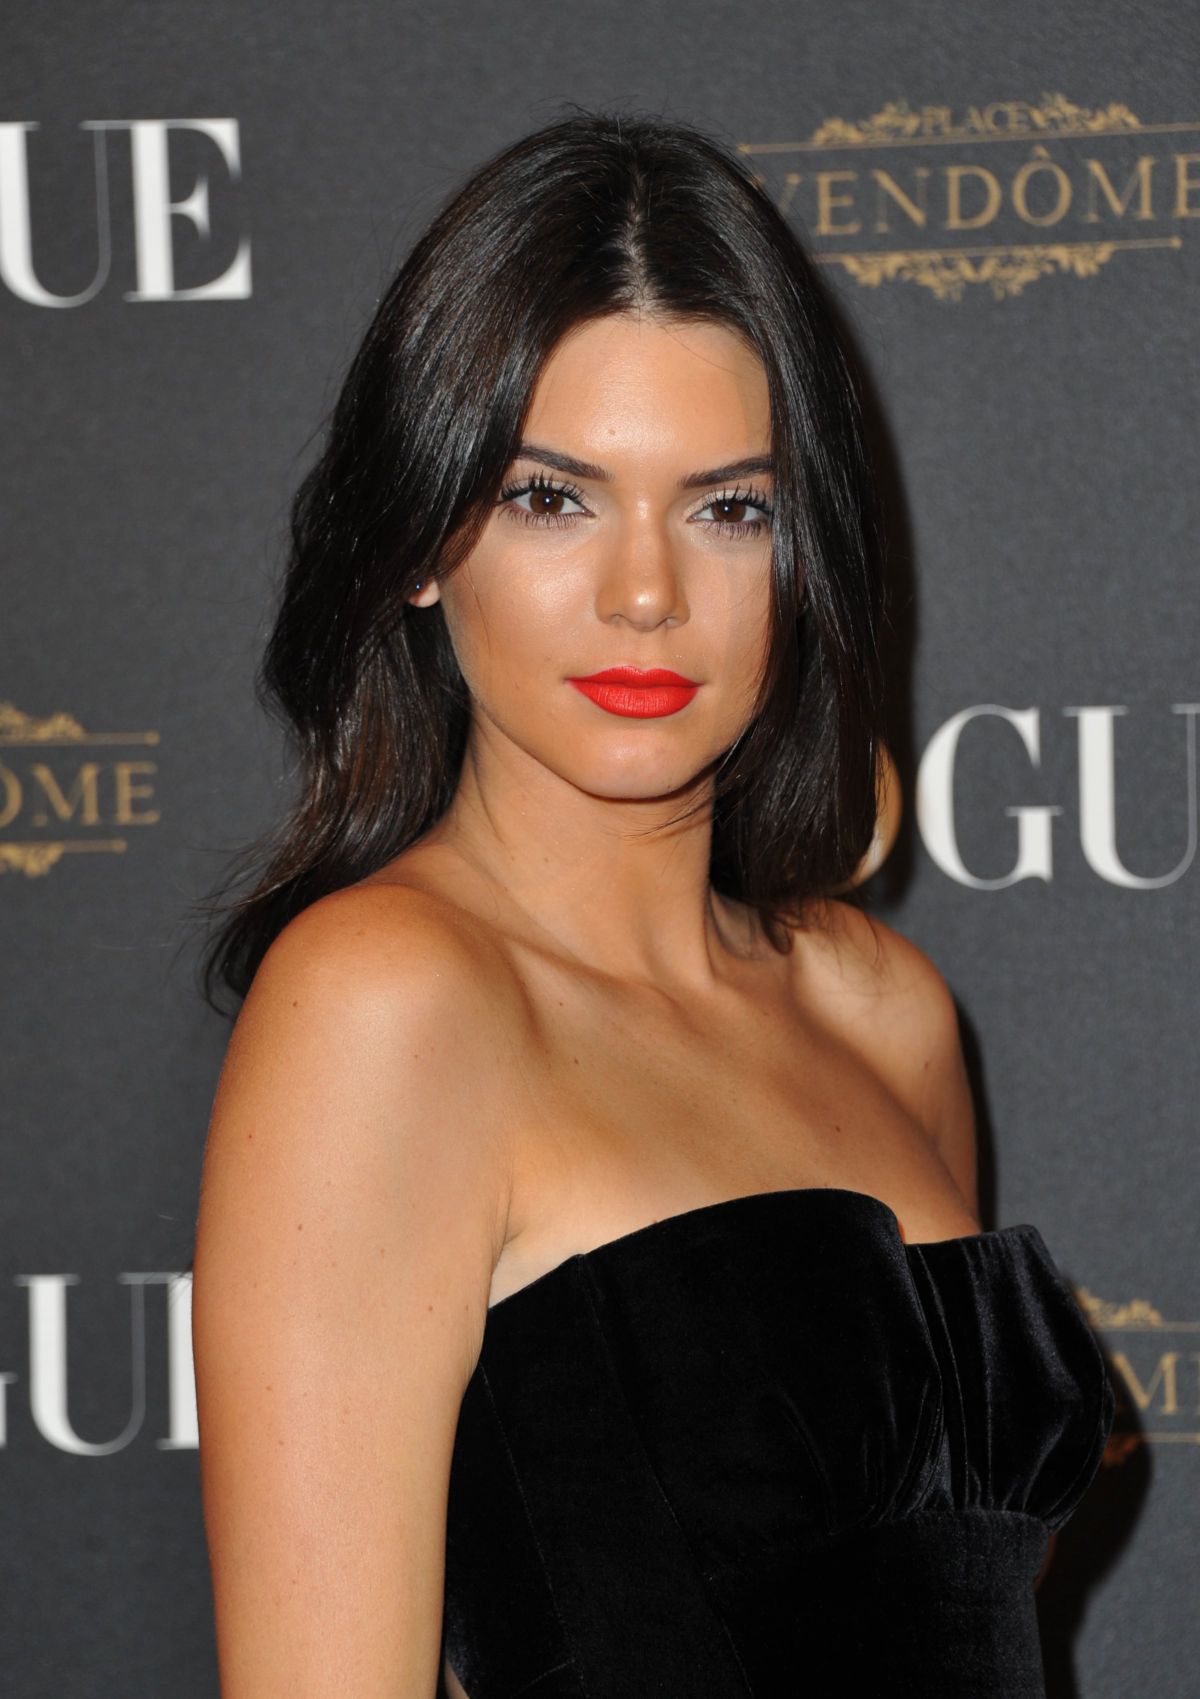 KENDALL JENNER at Vogue’s 95th Anniversary Party in Paris 10/03/2015 ...